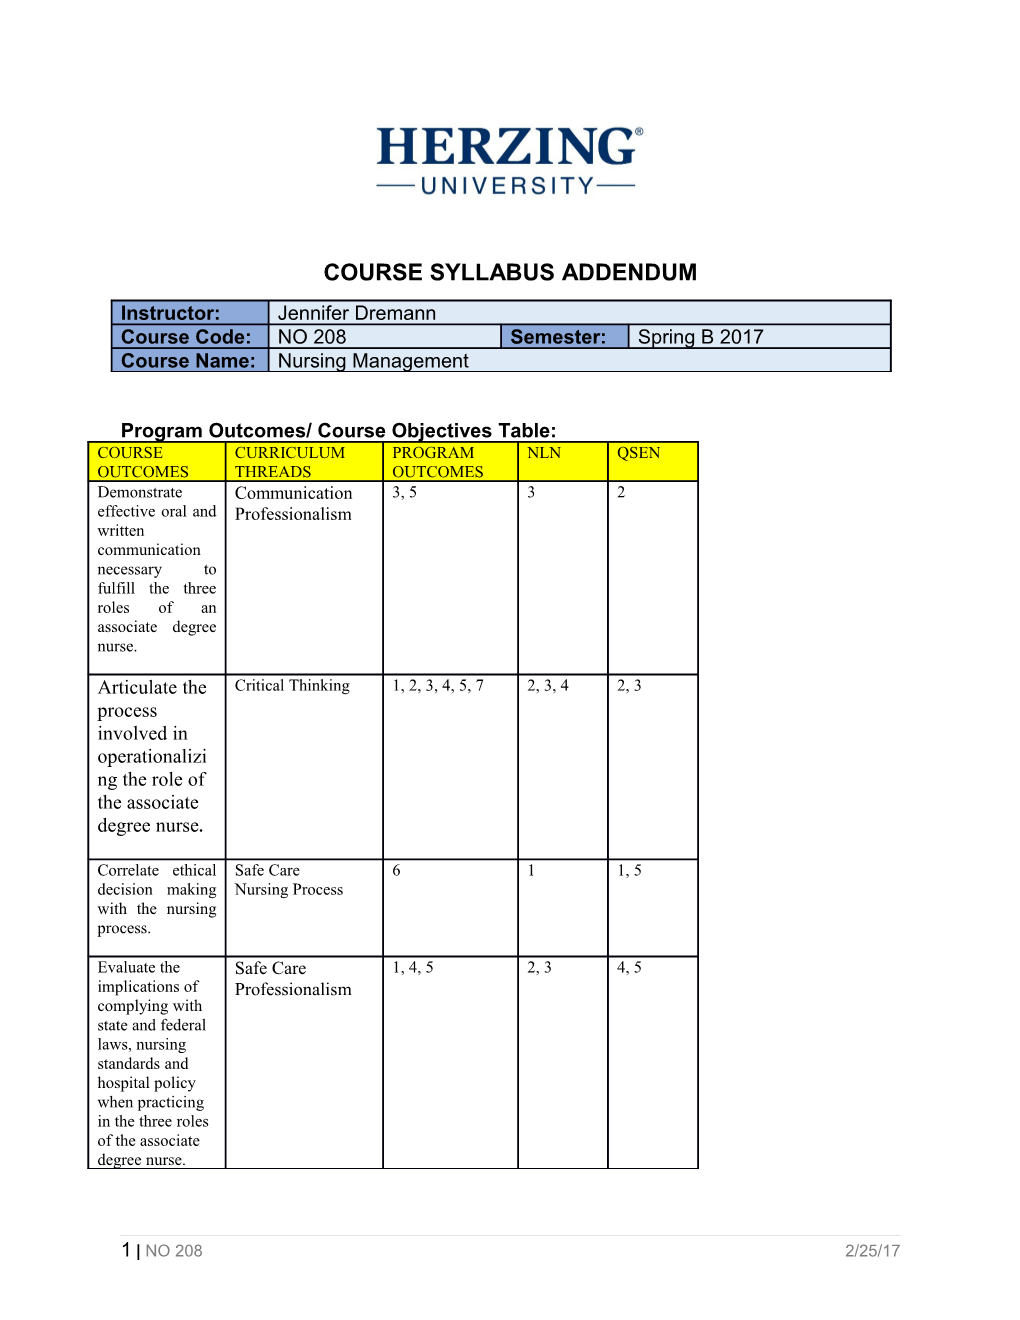 Program Outcomes/ Course Objectives Table